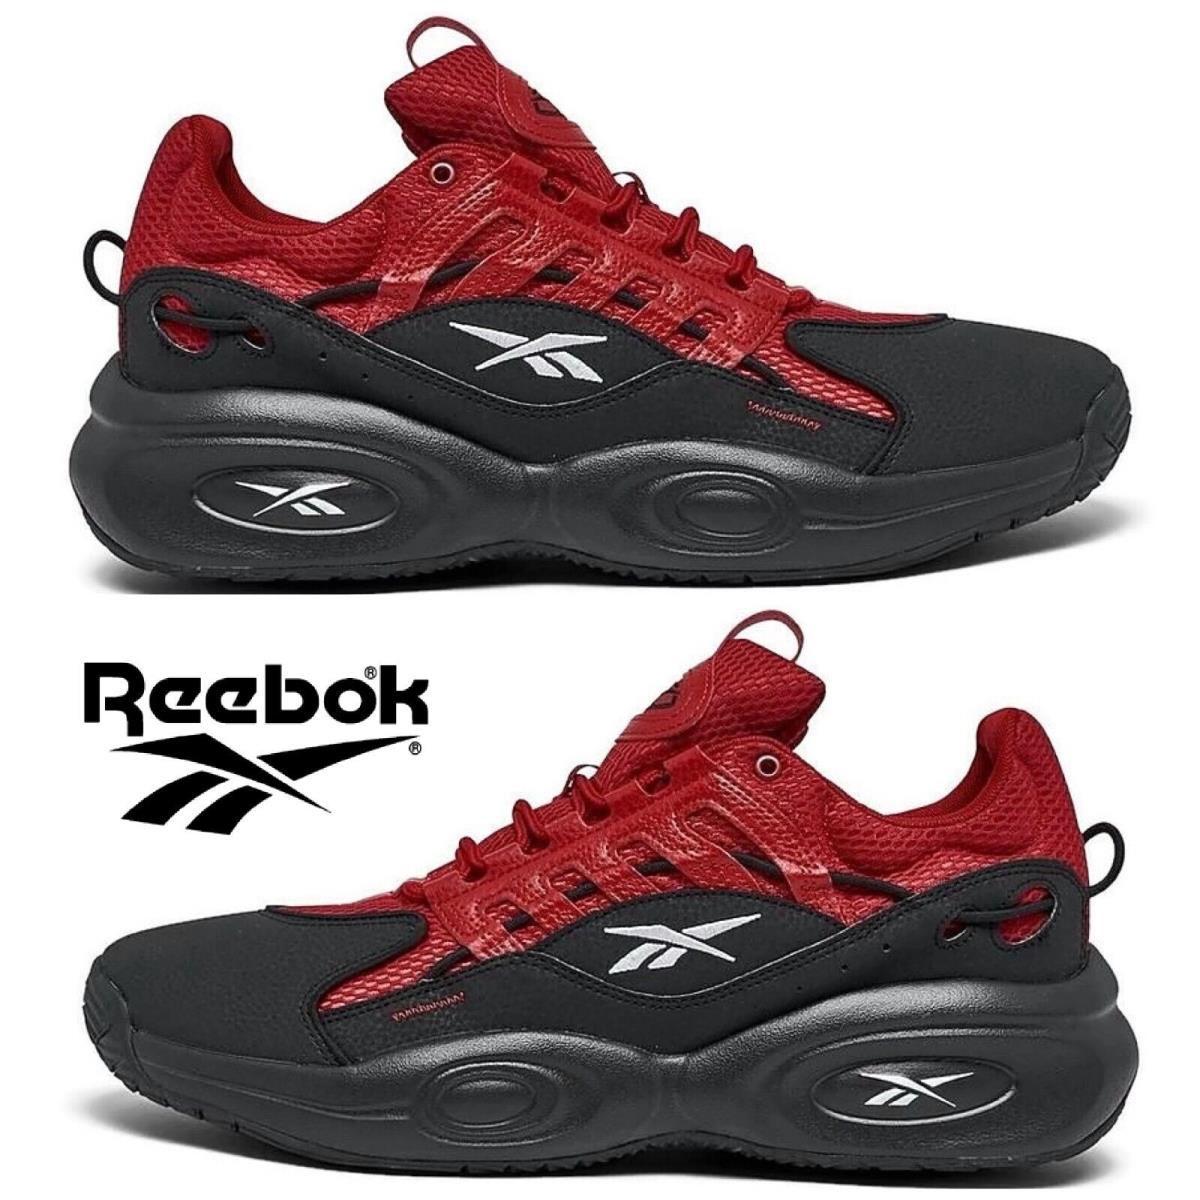 Reebok Solution Mid Basketball Shoes Men`s Sneakers Running Casual Sport Black